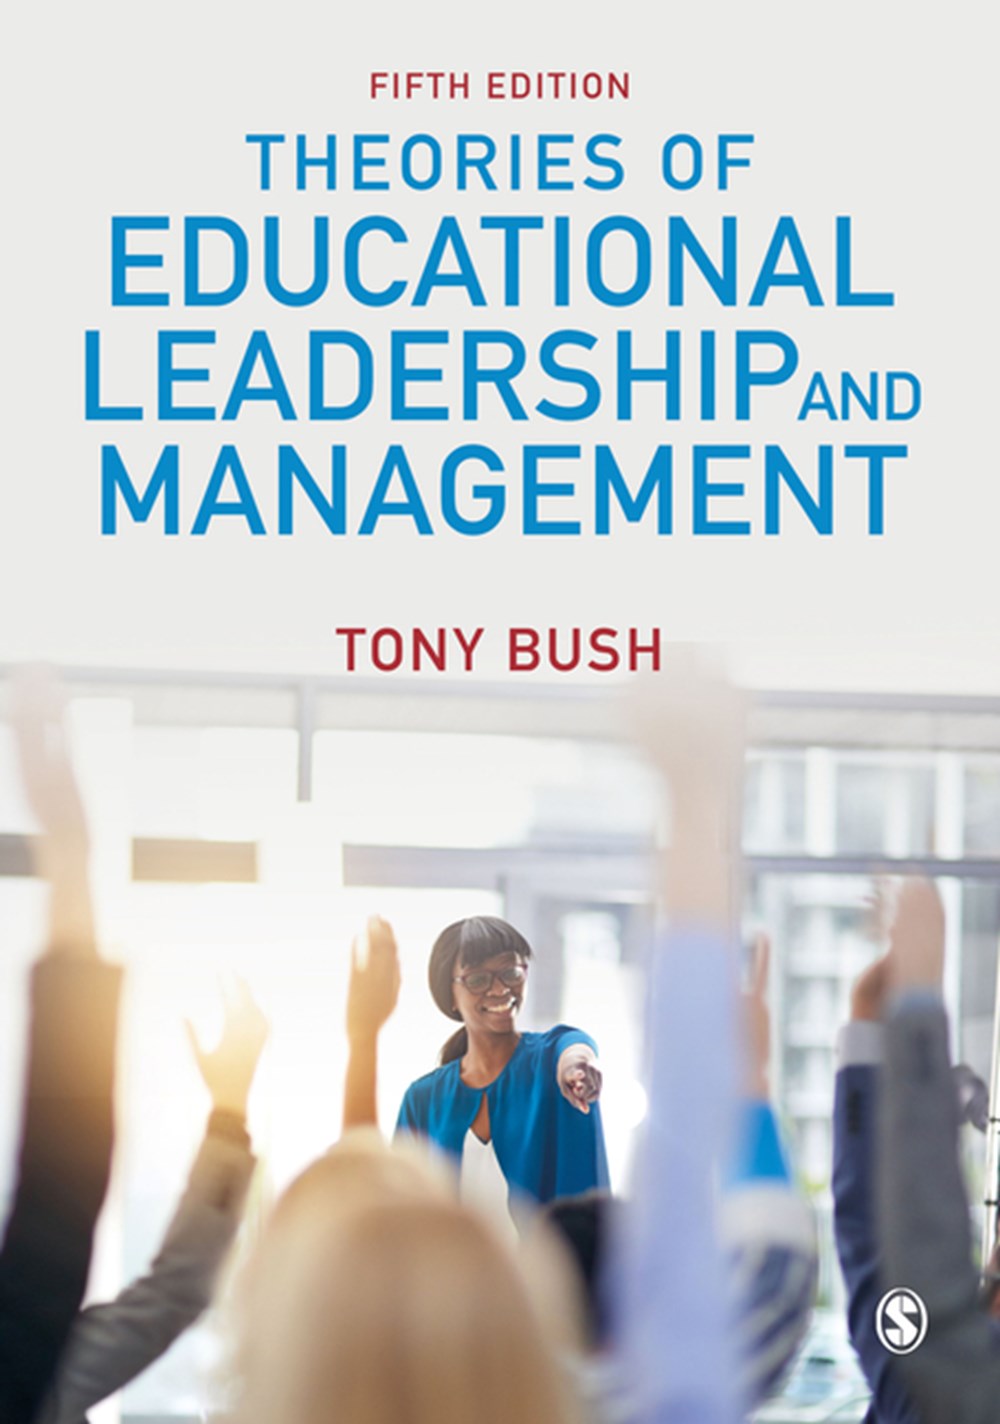 leadership and management case study #2